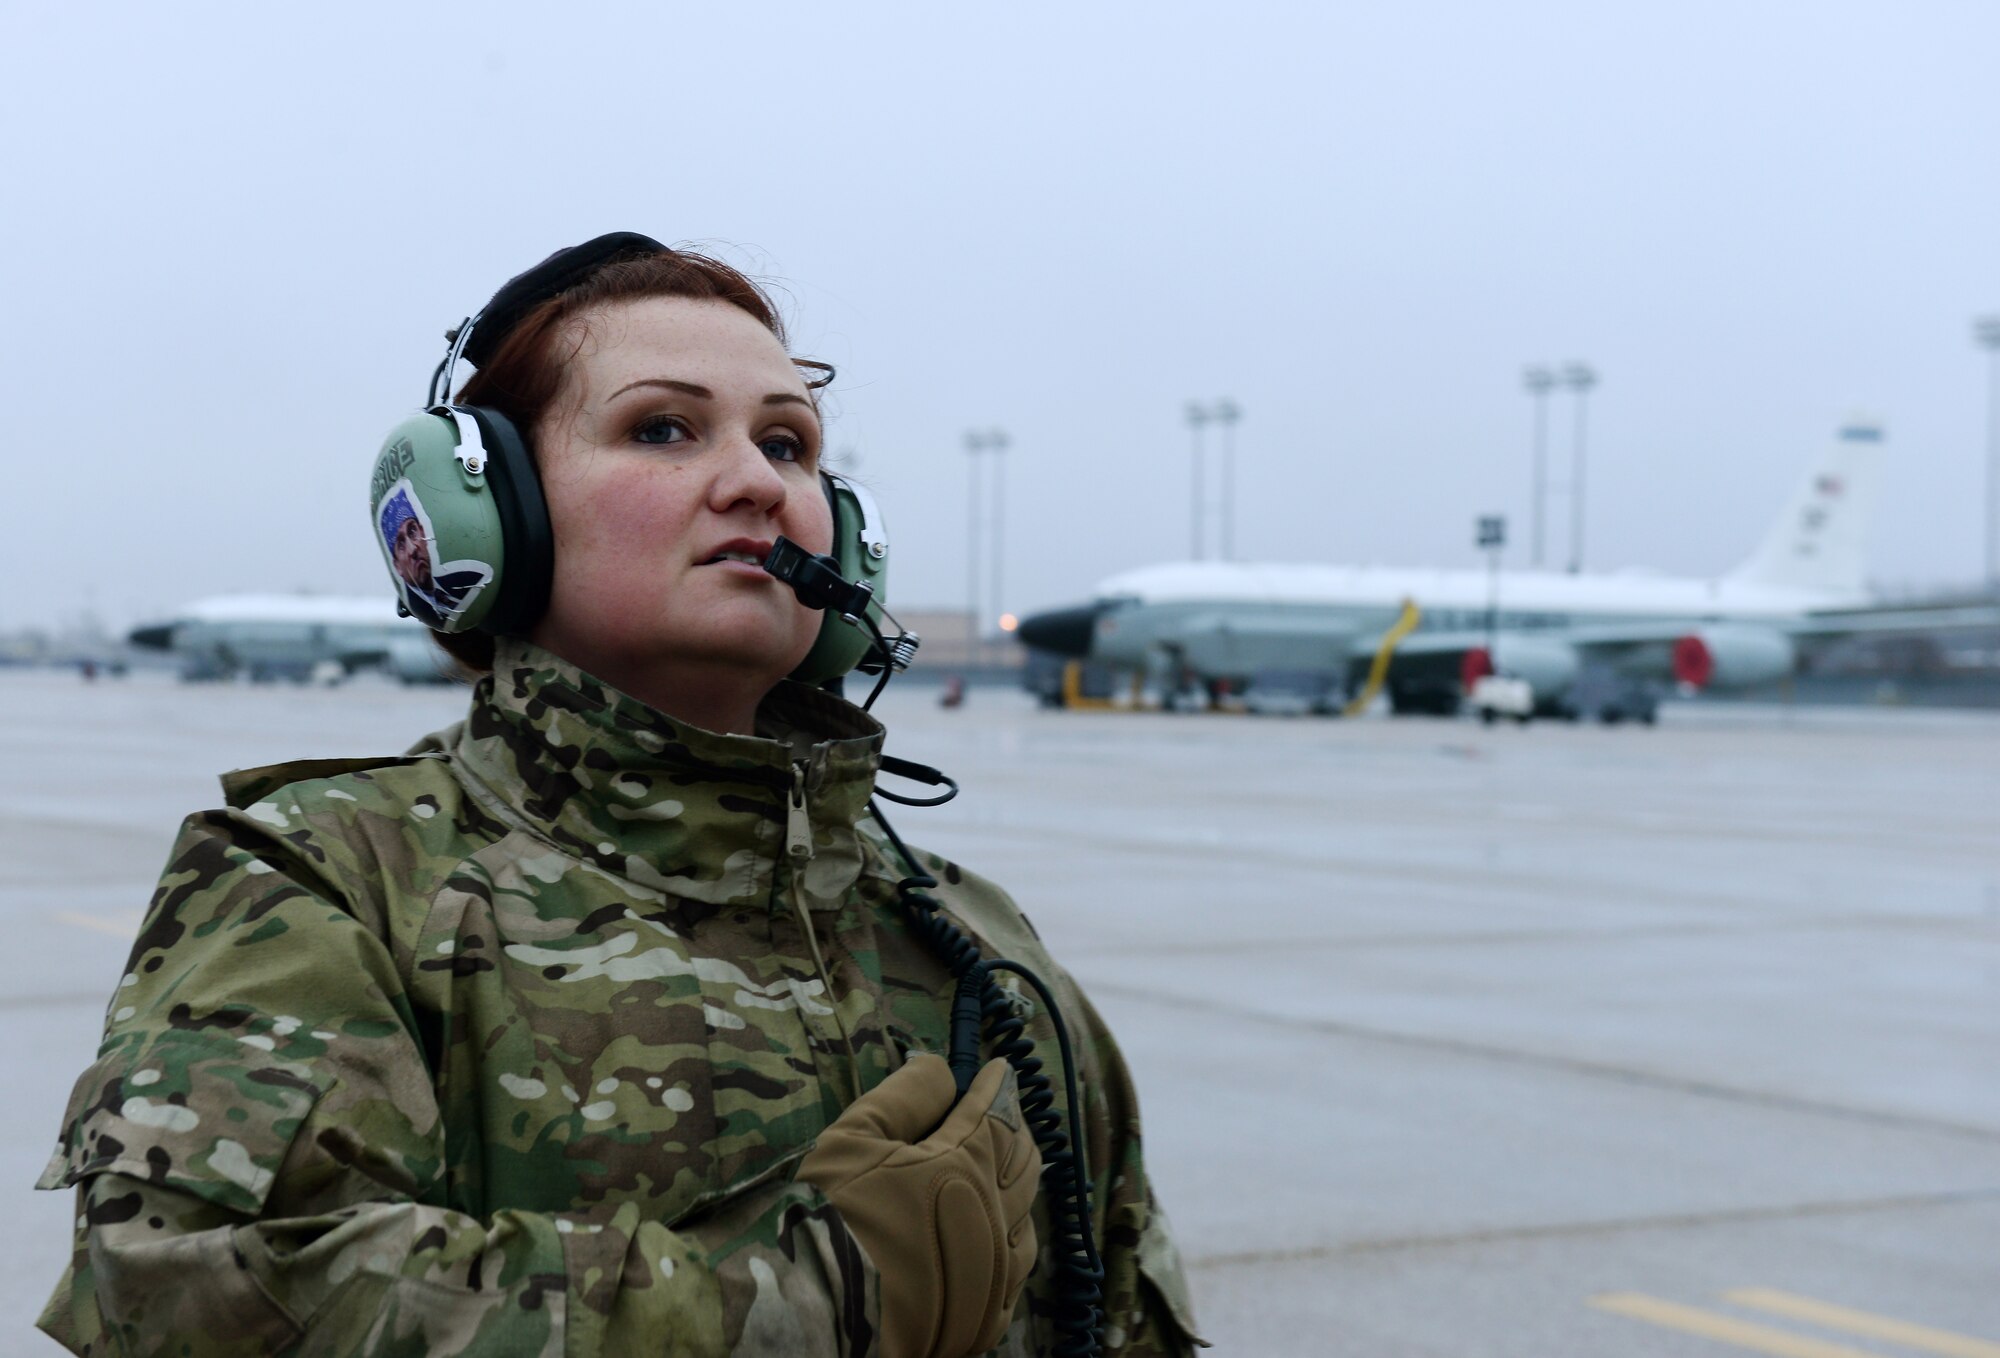 An Airman standing on the flightline listening to the pilot's instructions.